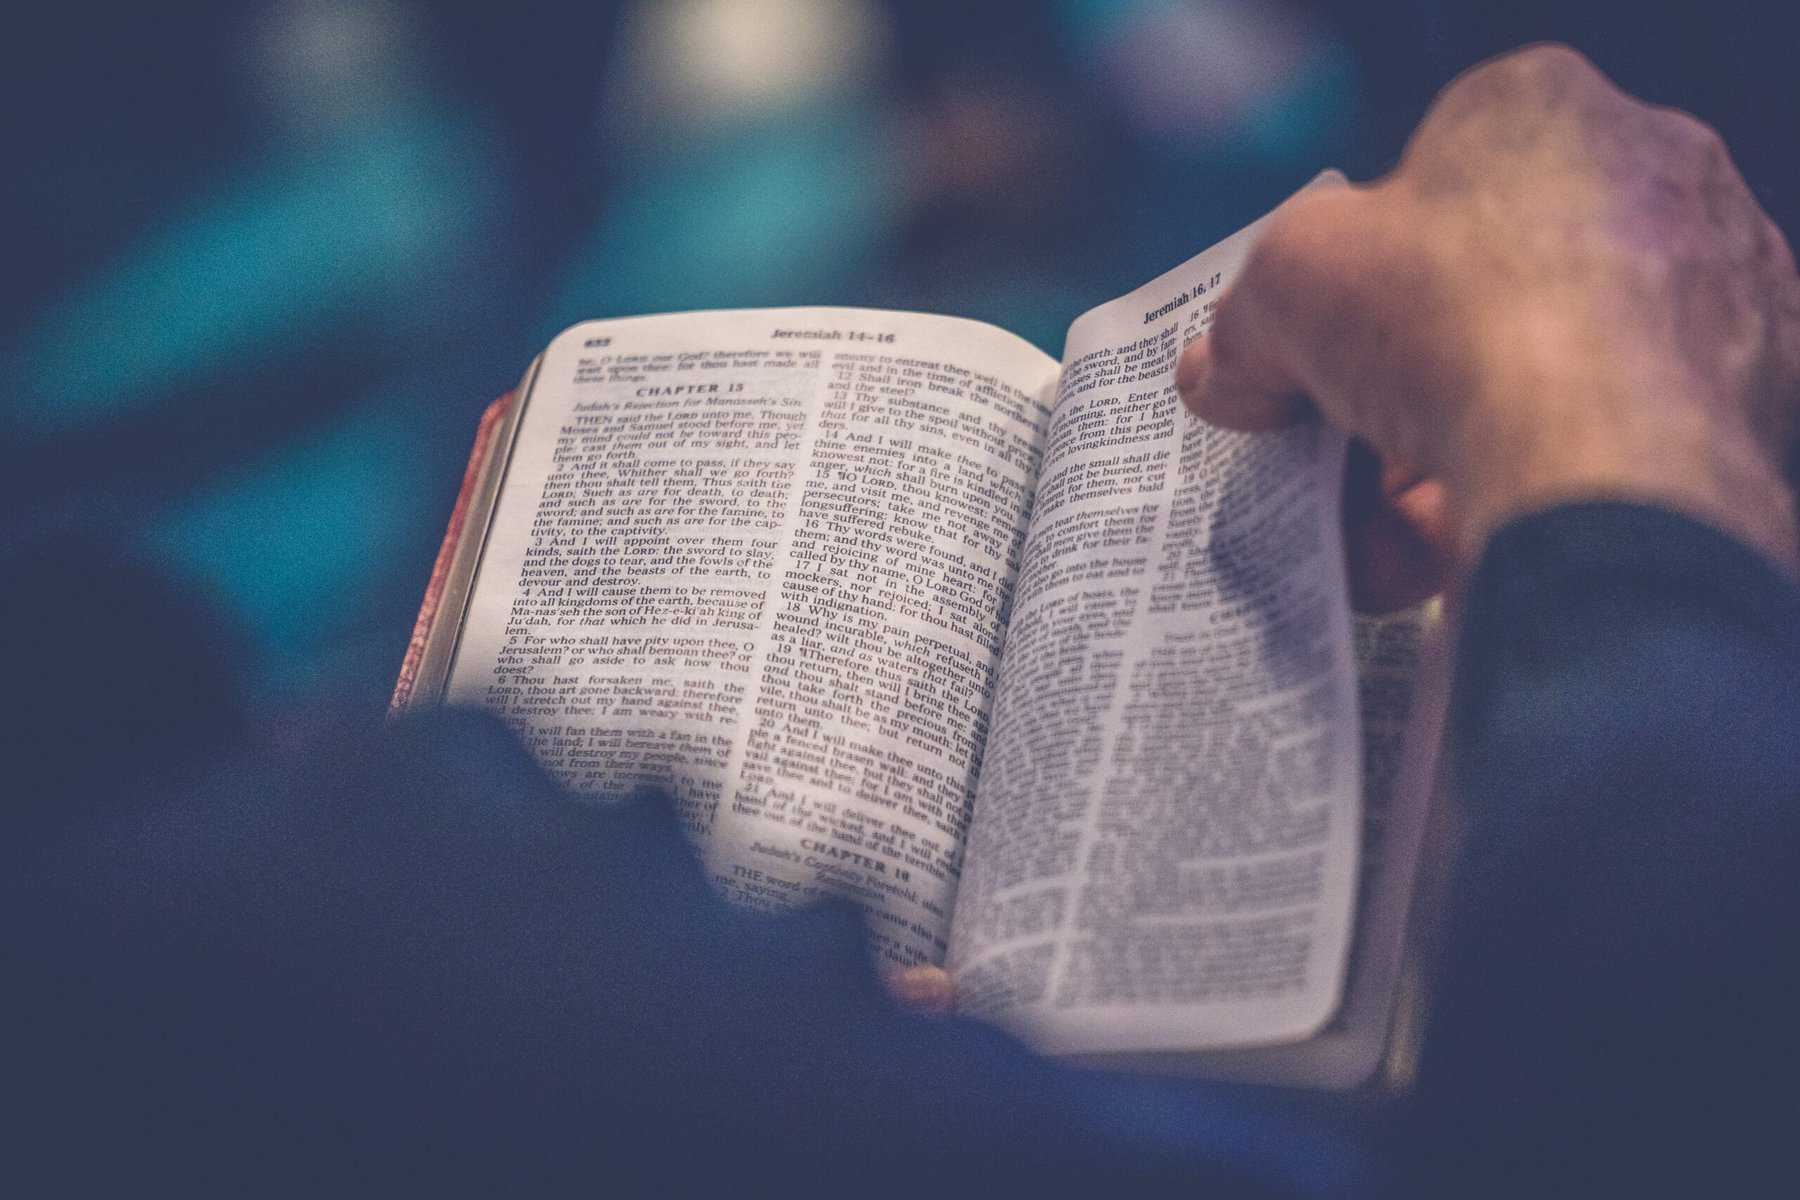 An open Bible is shown close up sitting on a man's lap with his right hand ready to turn the page.